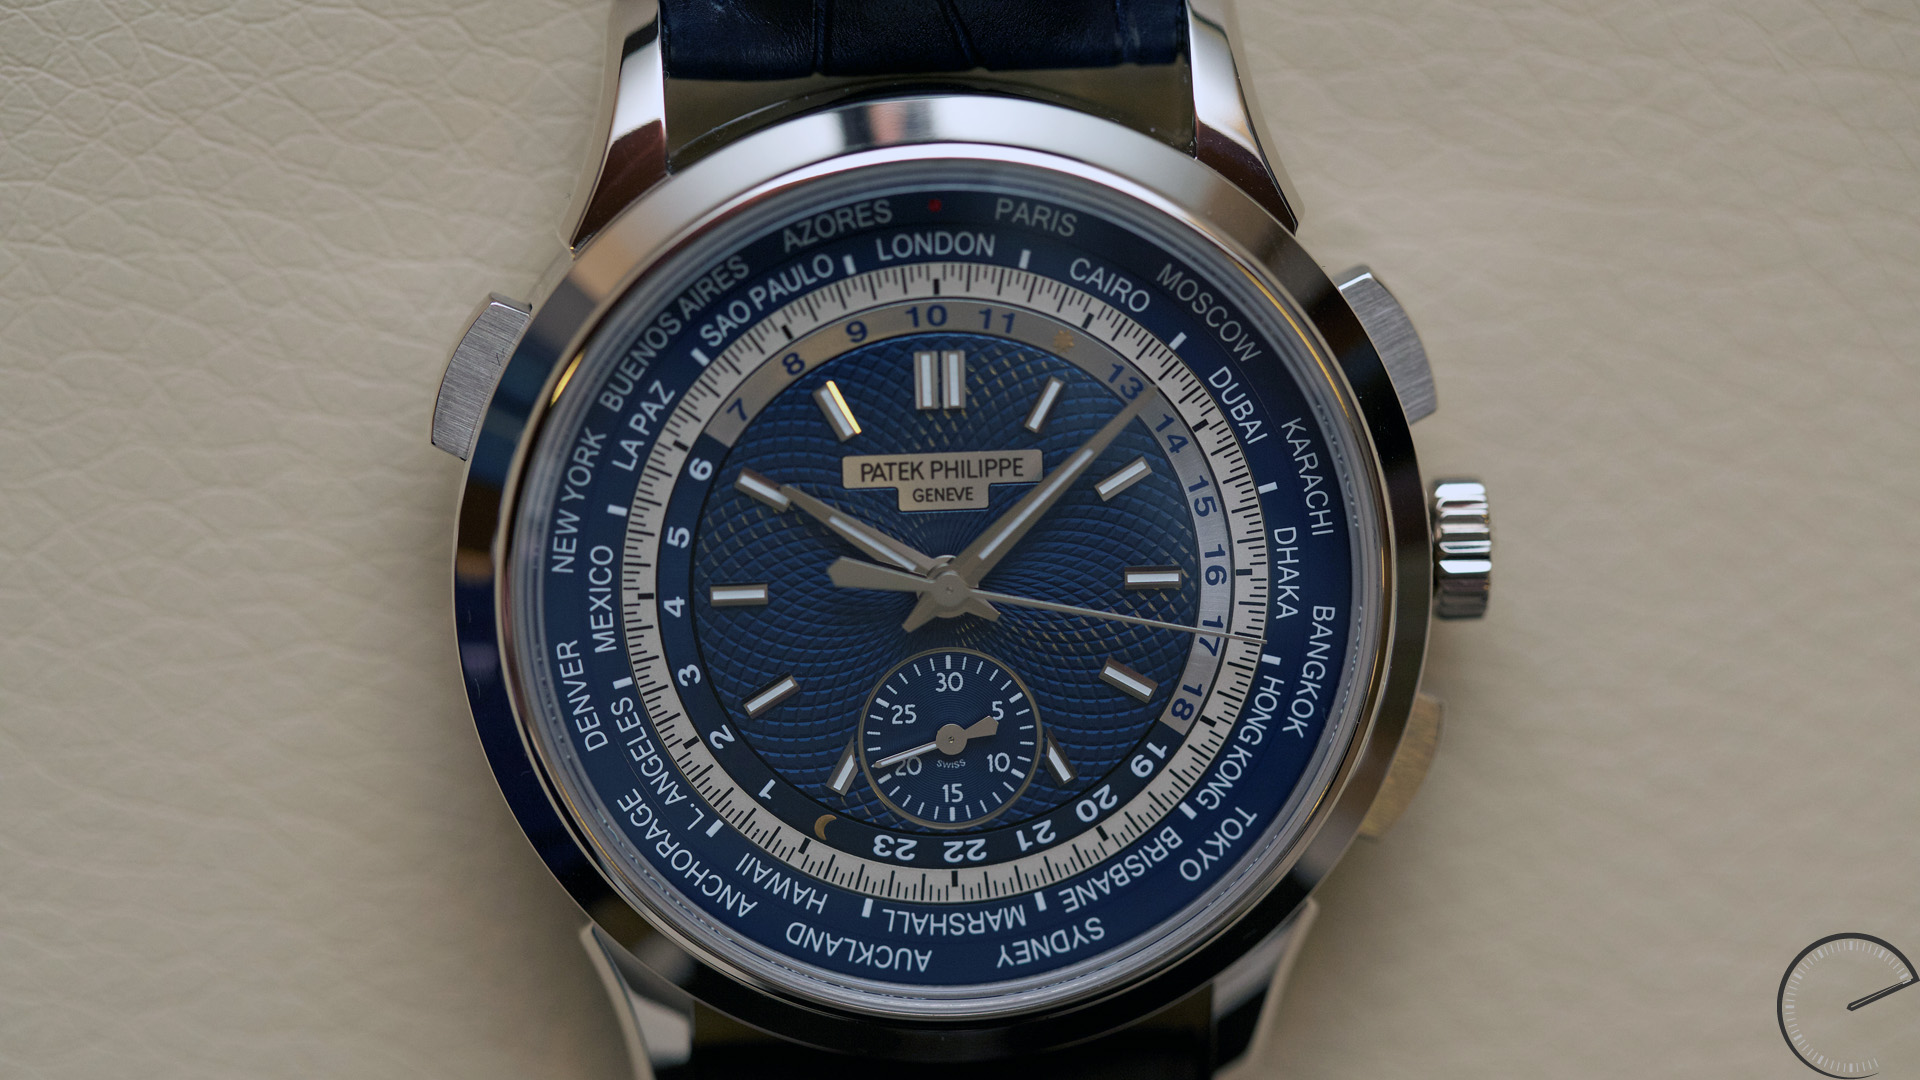 Patek_Philippe_World_Time_Chronograph_Ref. 5930_dial2 - ESCAPEMENT Magazine - watch replica reviews by Angus Davies